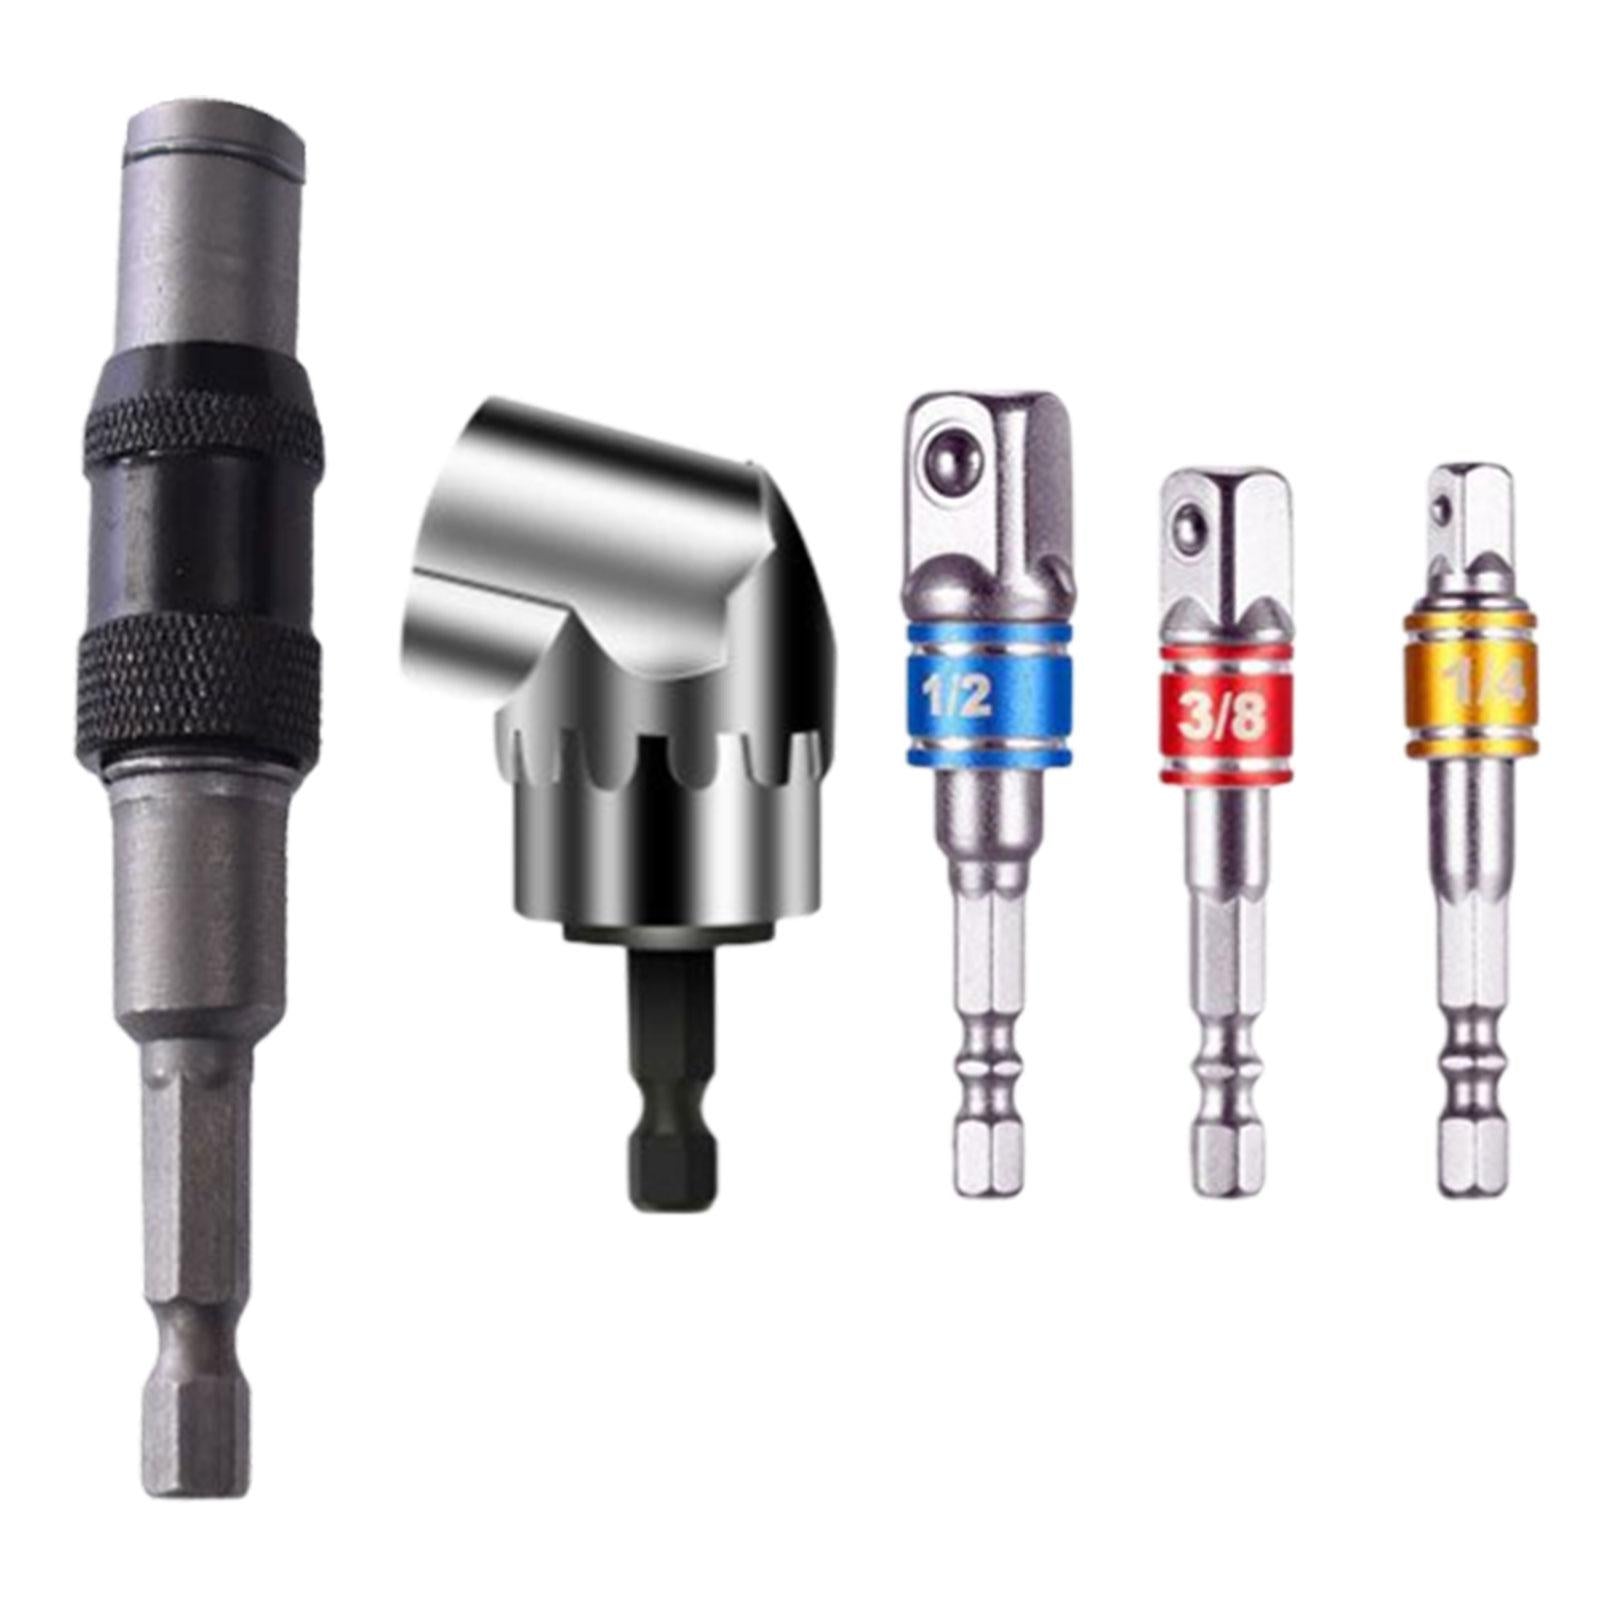 5Pcs Flexible Hex Shank Magnetic Screw Drill Tip for Impact Drivers